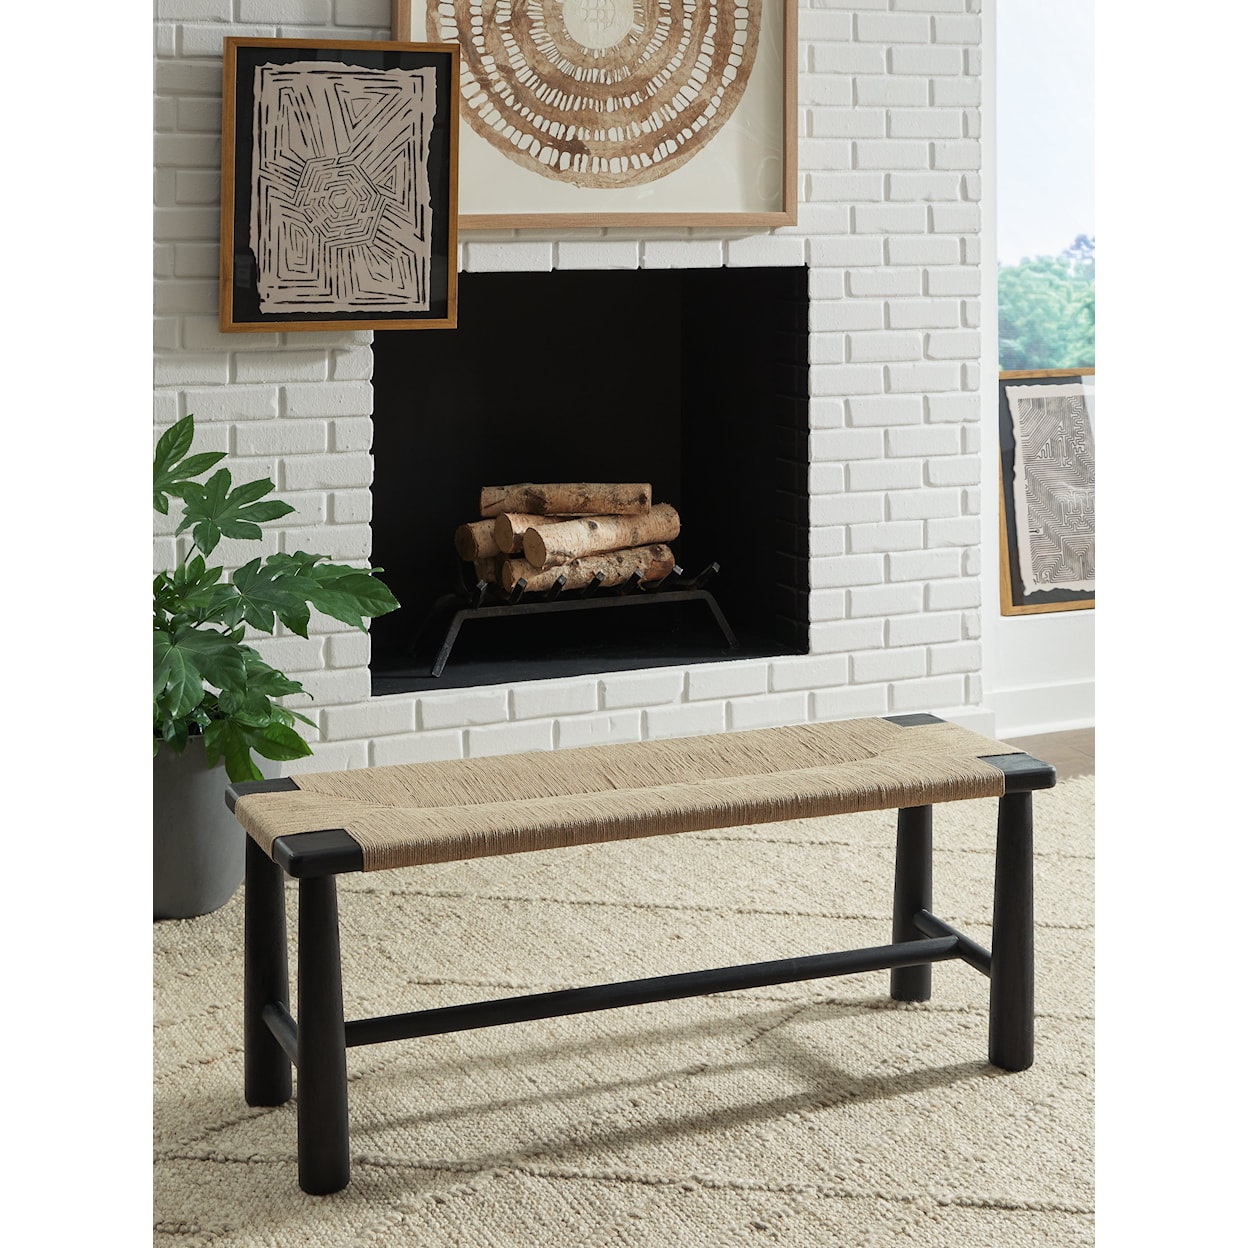 Signature Design by Ashley Furniture Acerman Accent Bench